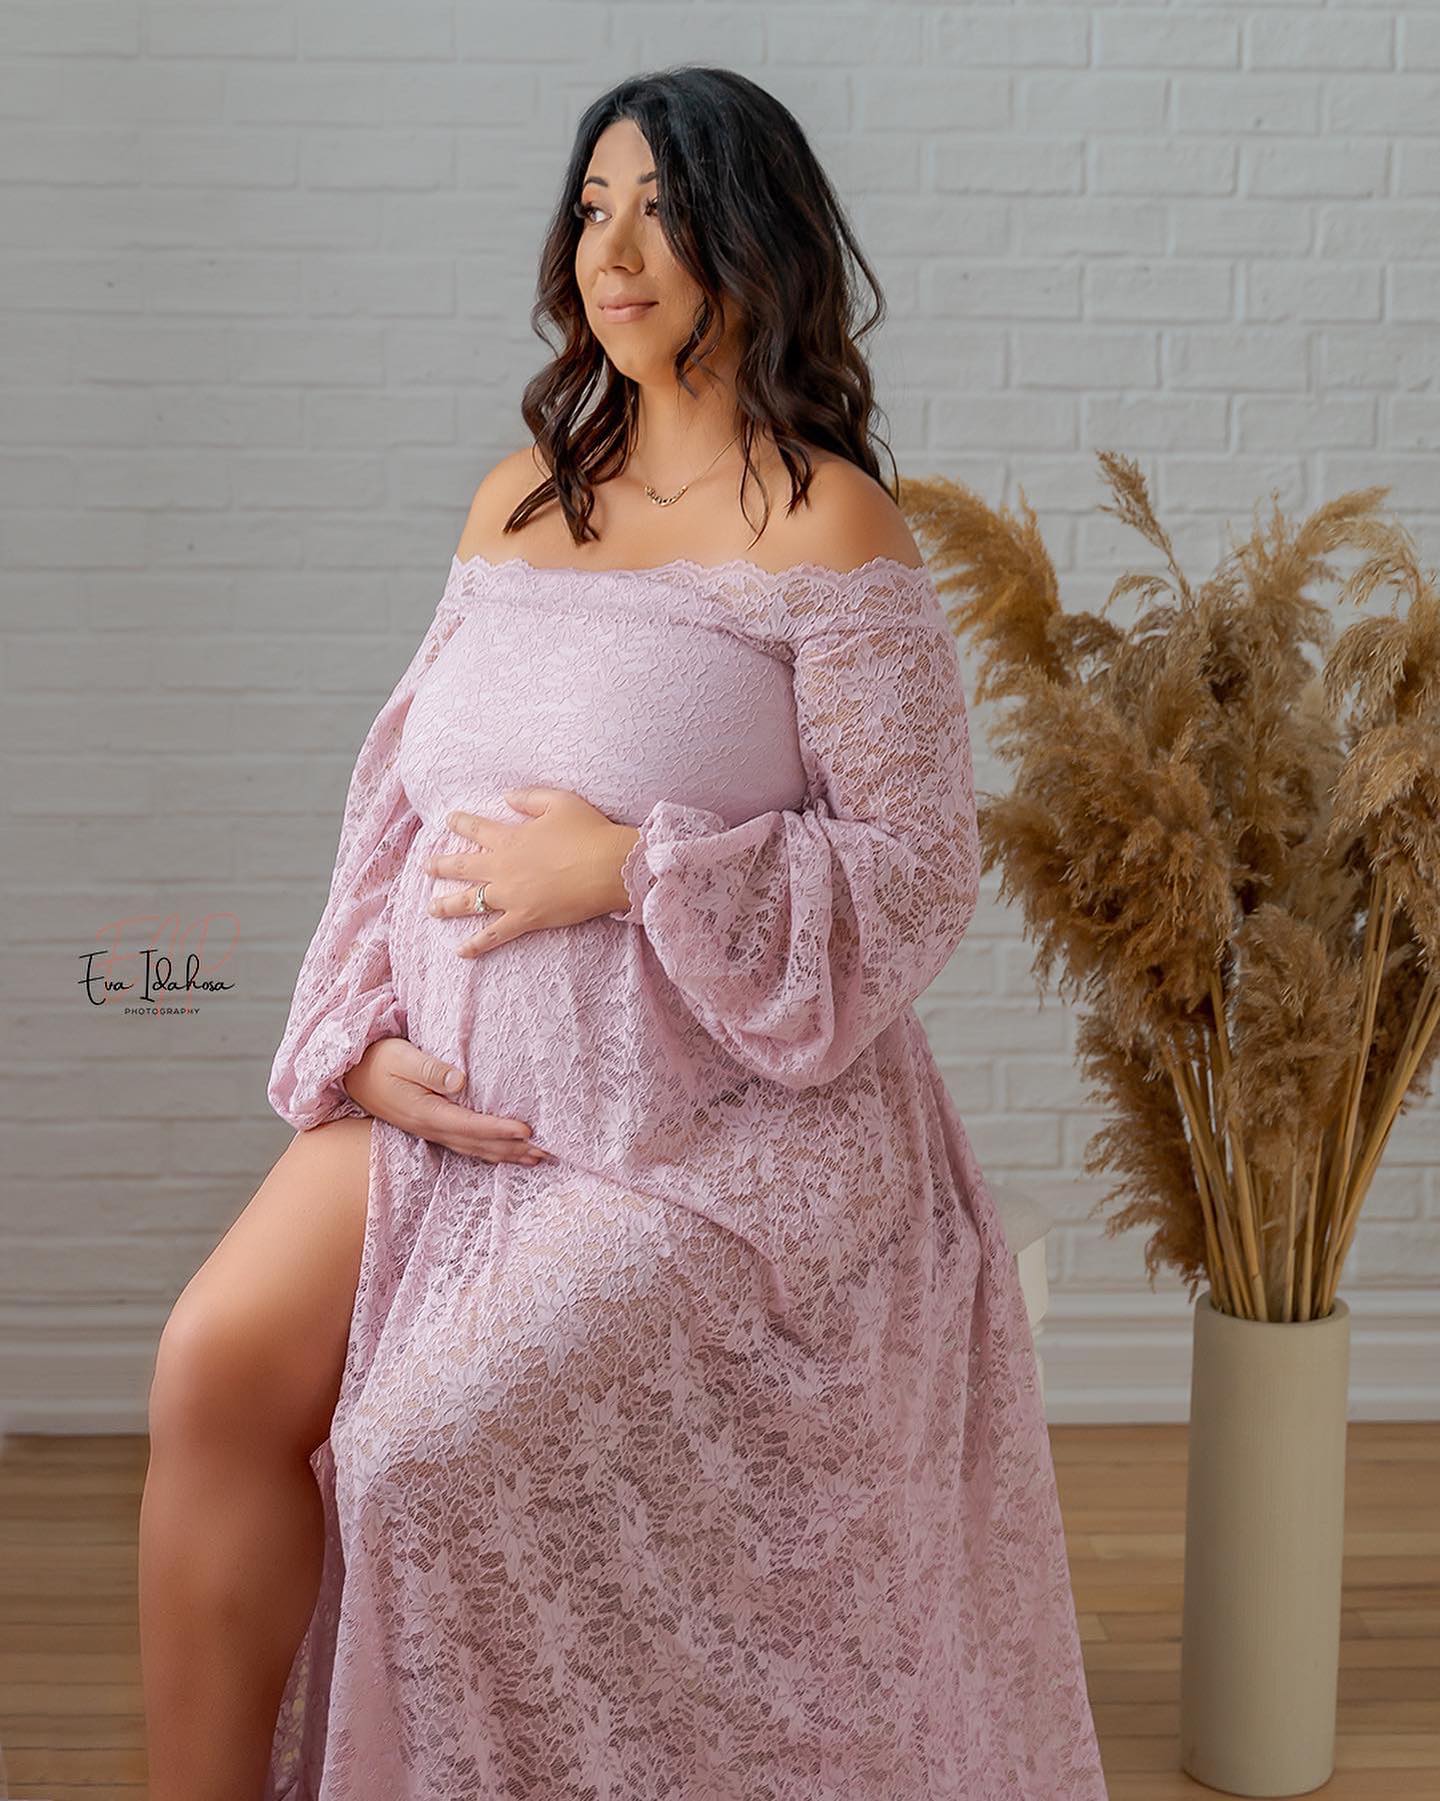 Pink Lace Tristan Gown - maternity photoshoot dress